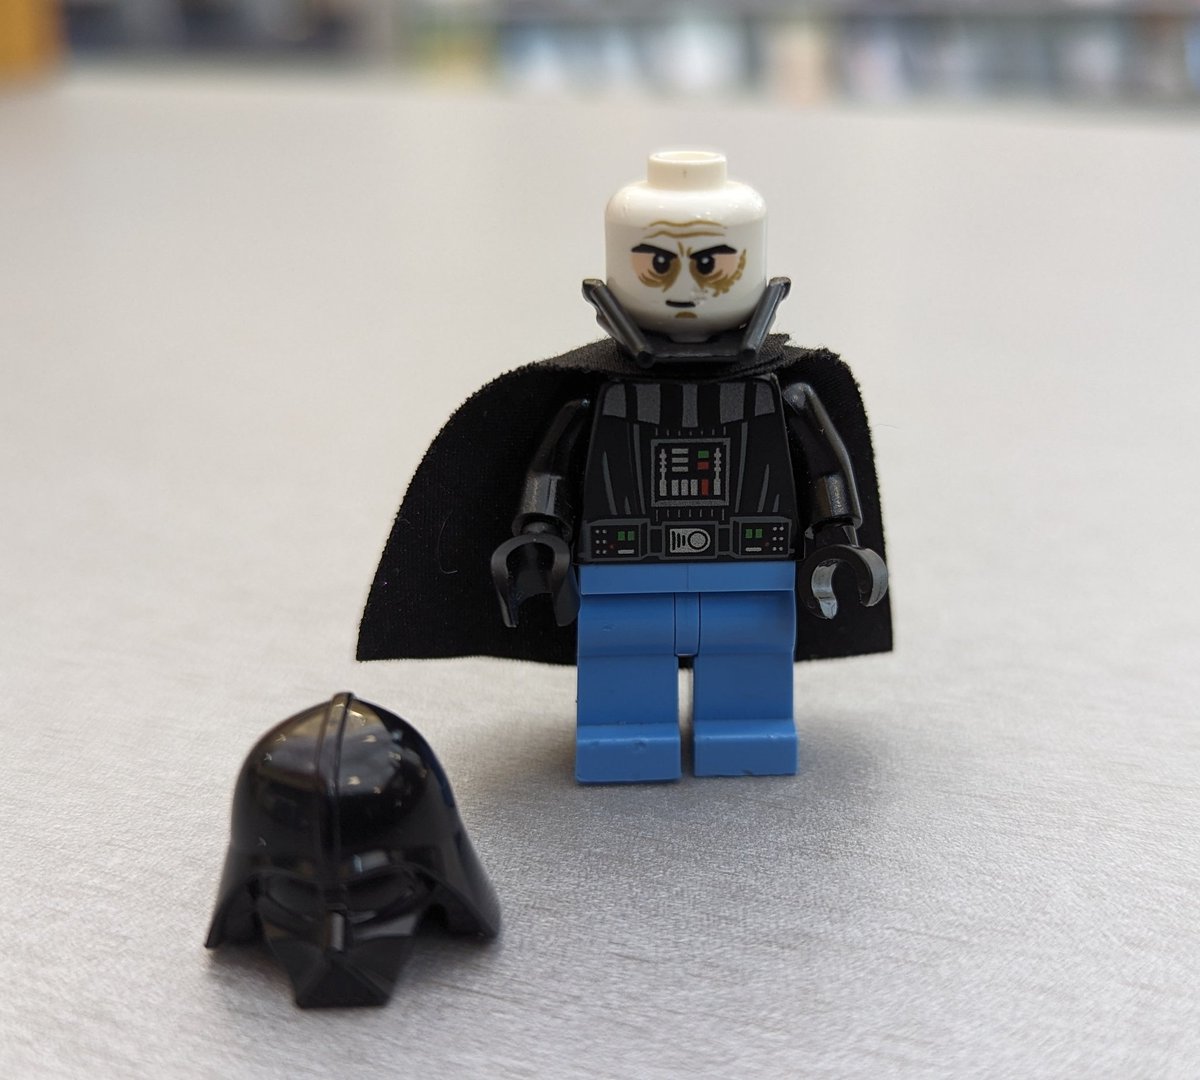 Lego Vader enjoying the beginning of summer in his jeans with his helmet off #legovader #summervibes